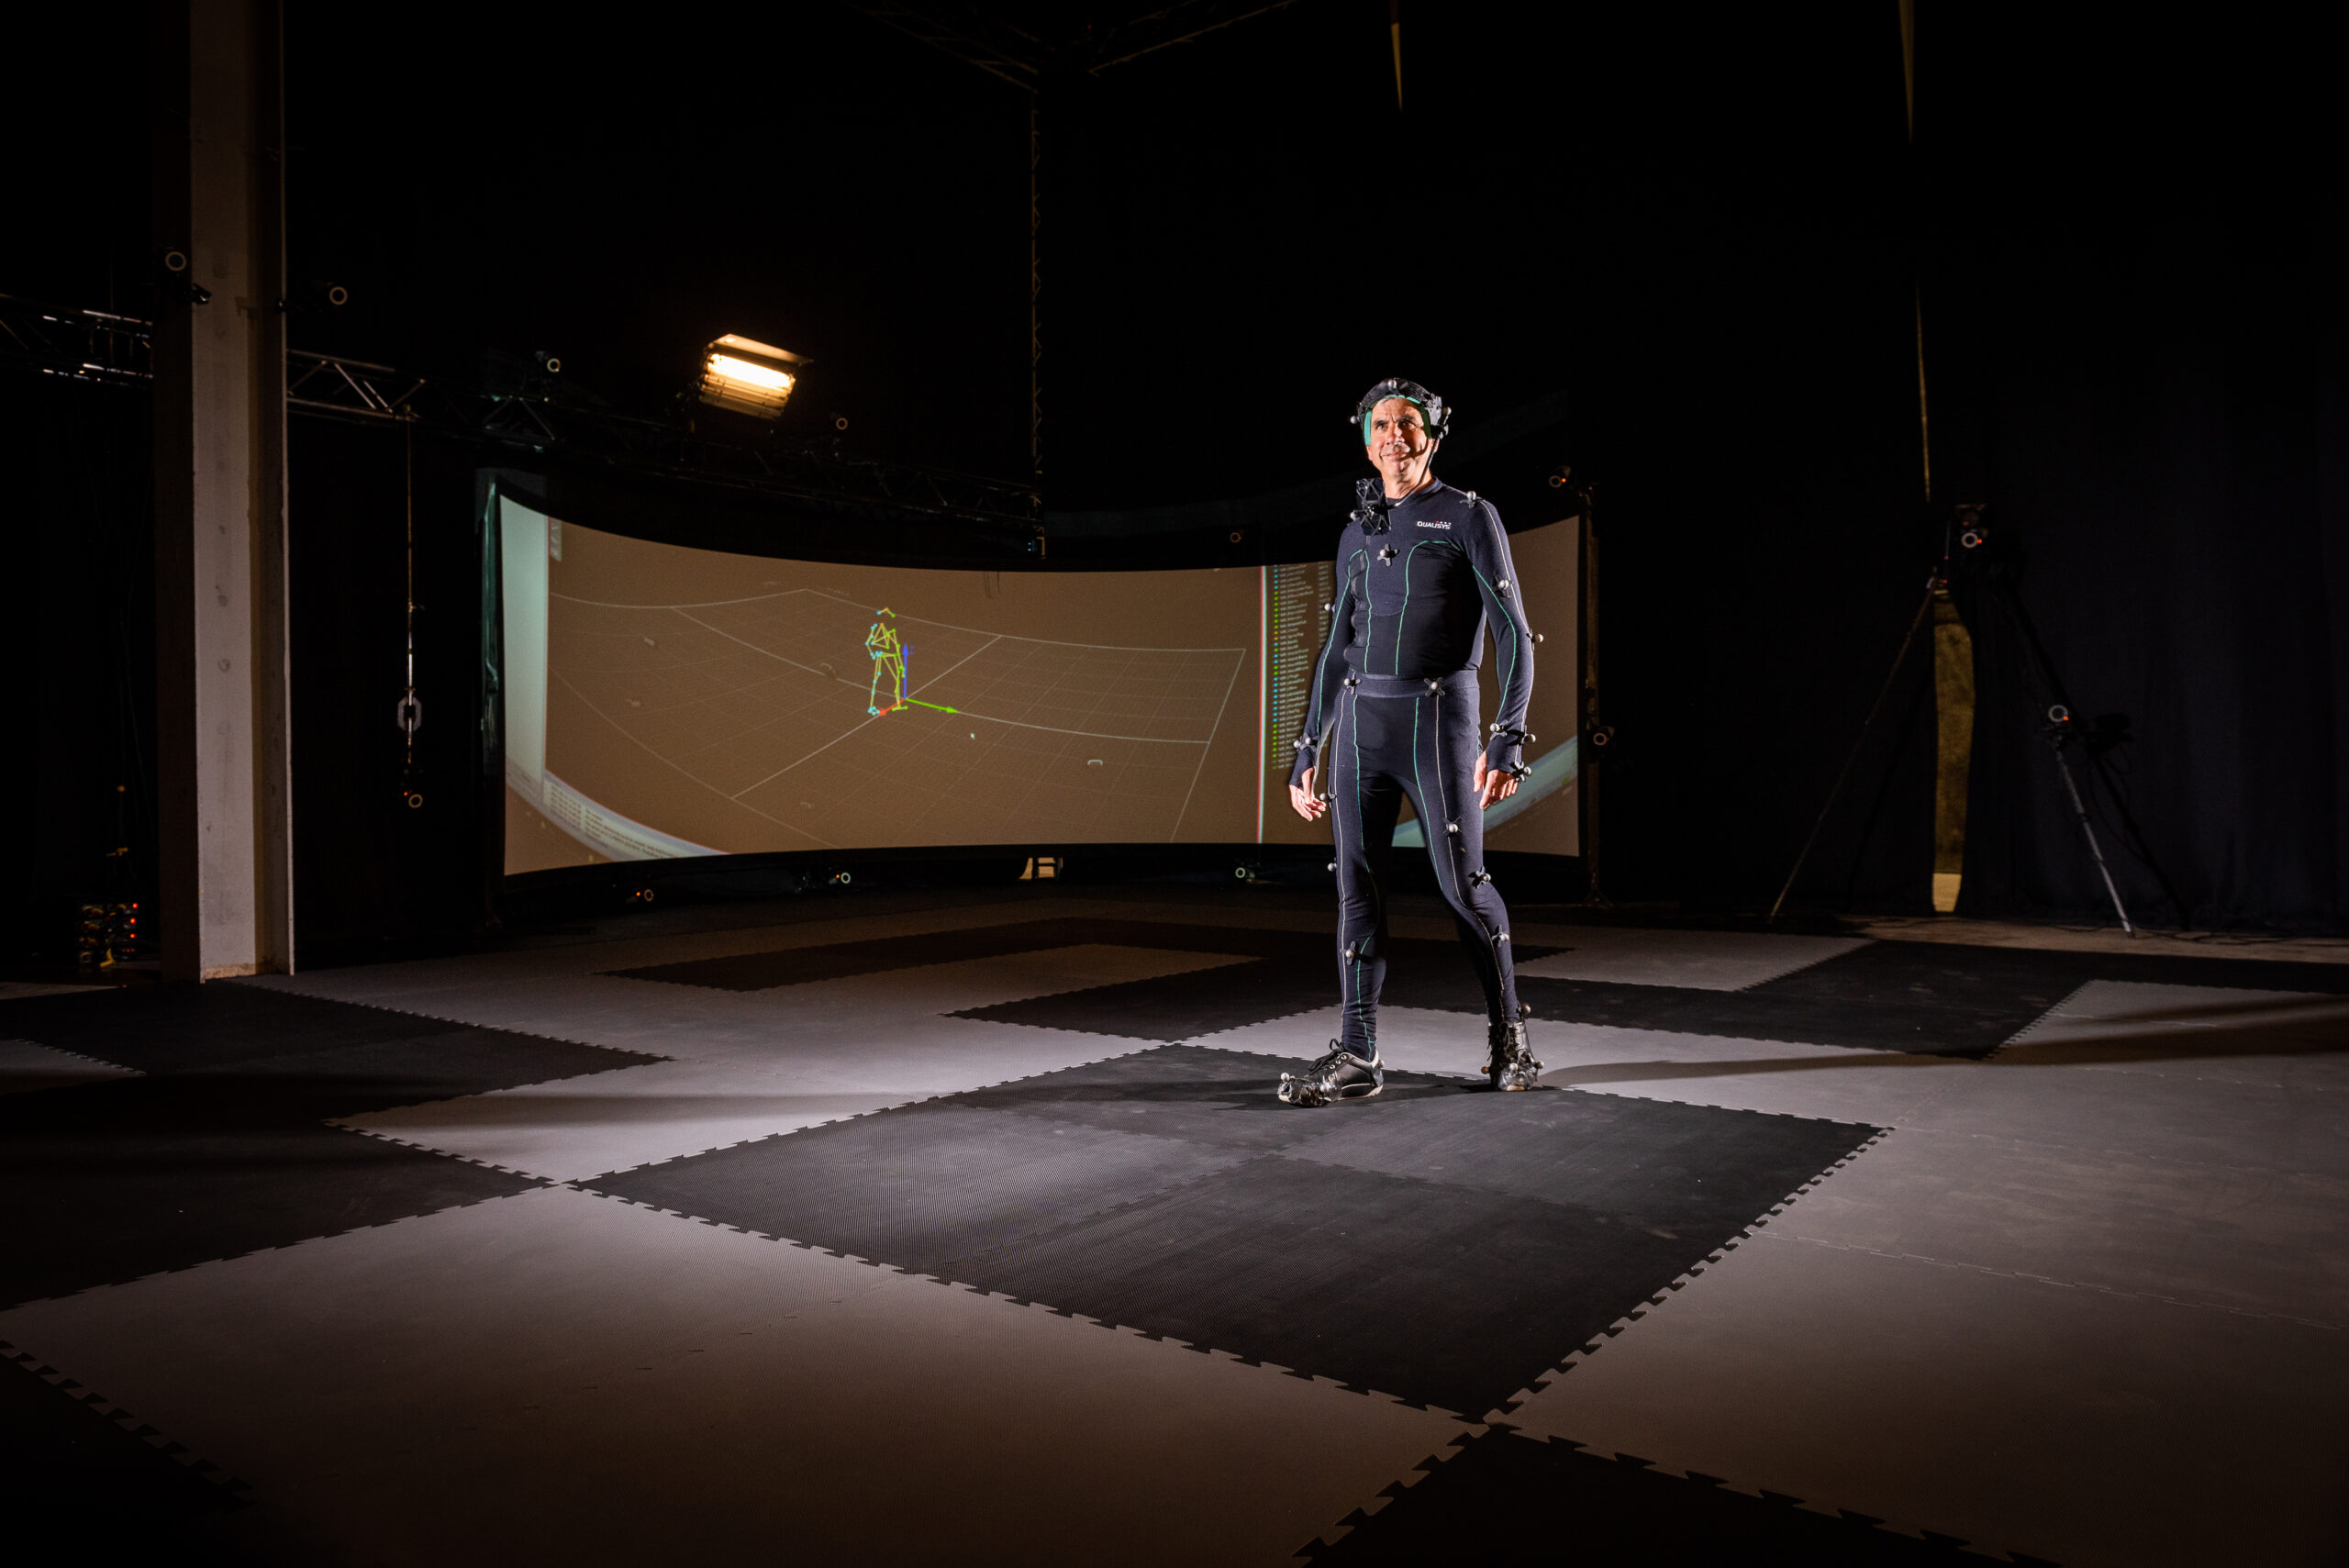 An image of a man stood in CAMERA's motion capture stage.